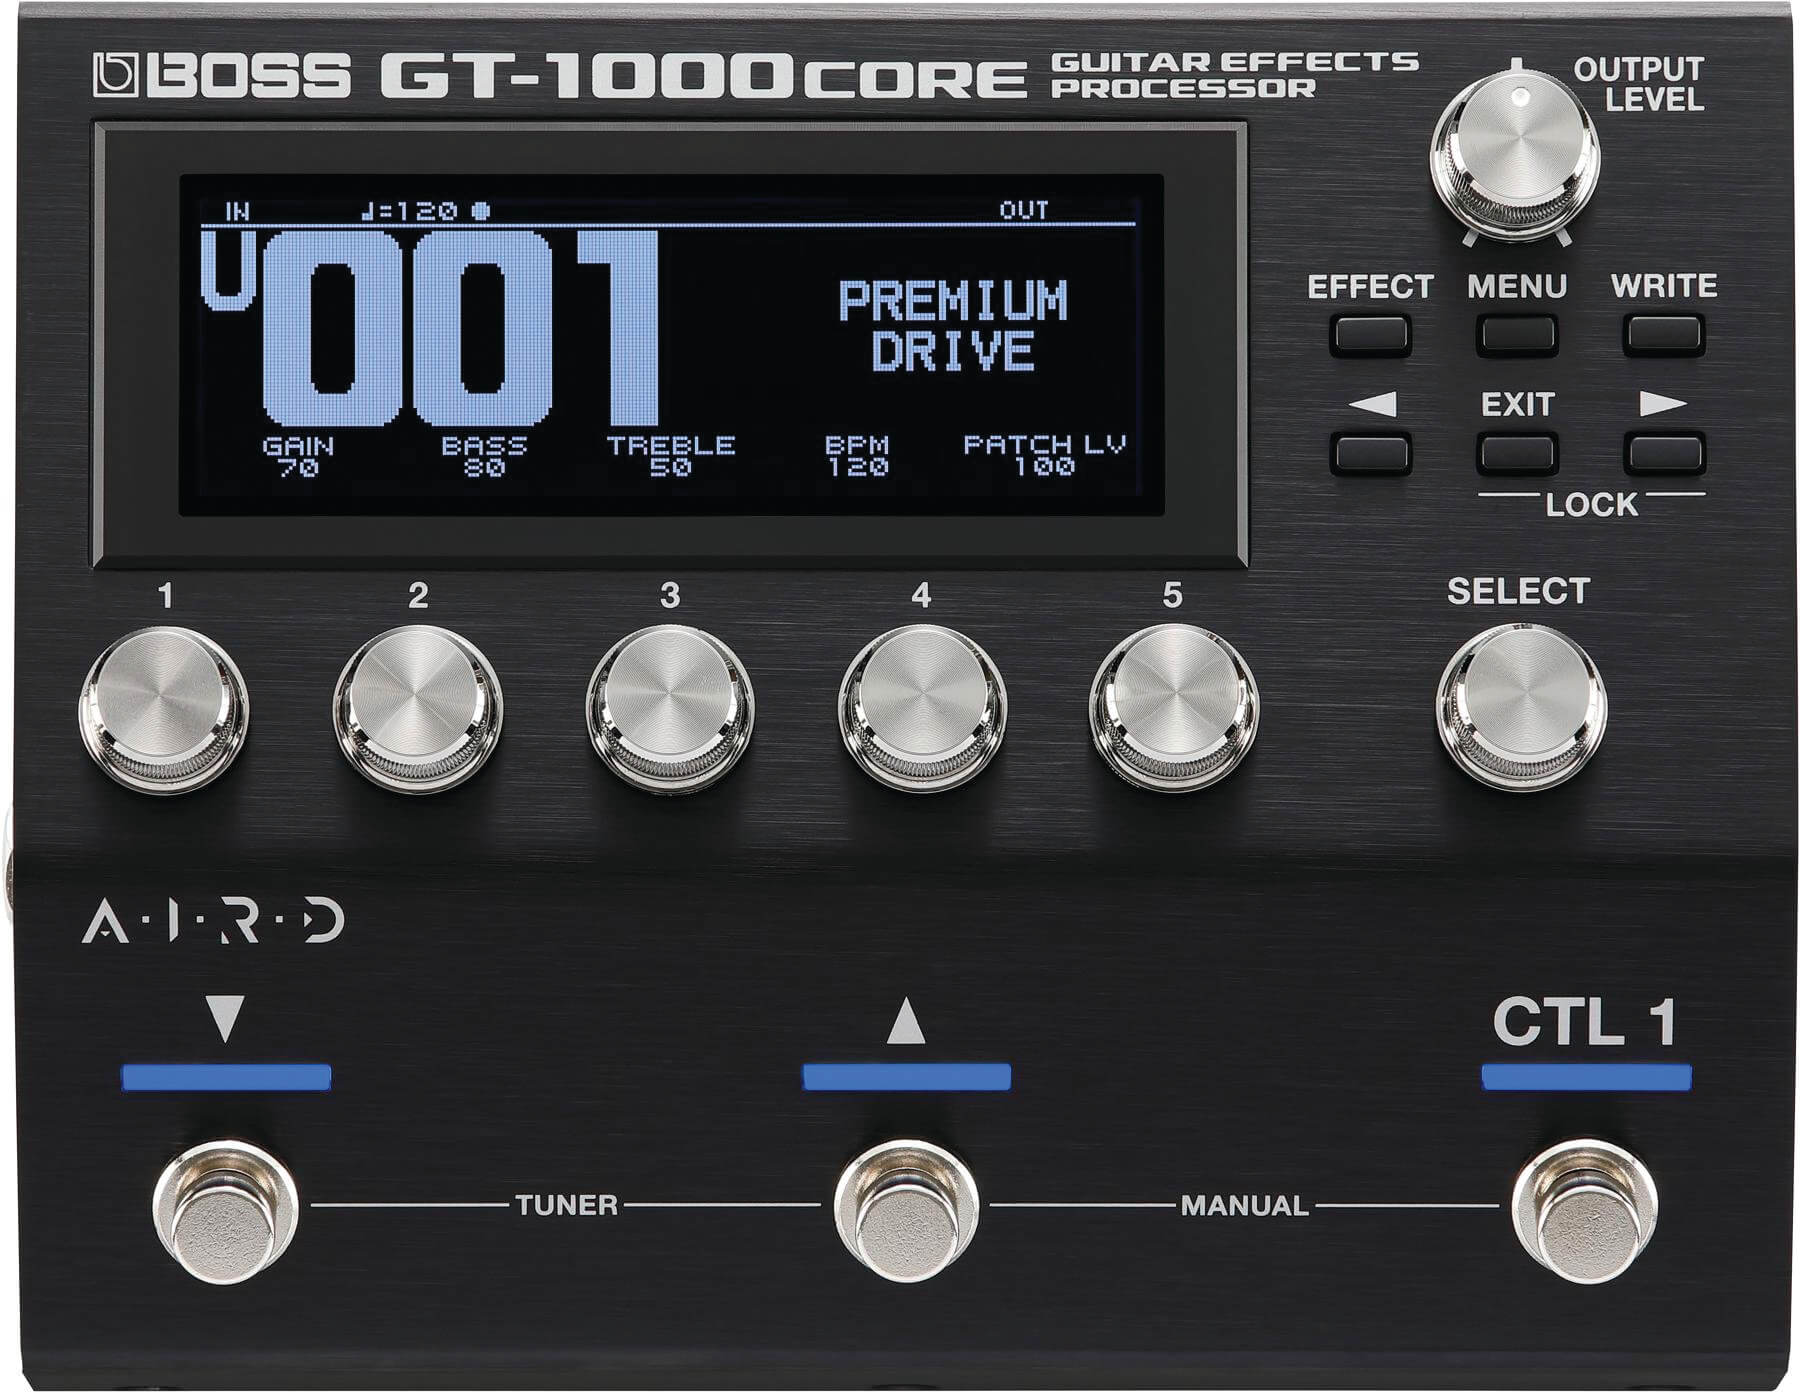 REVIEW: Boss GT-1000CORE Multi-Effects Processor | Performer Mag